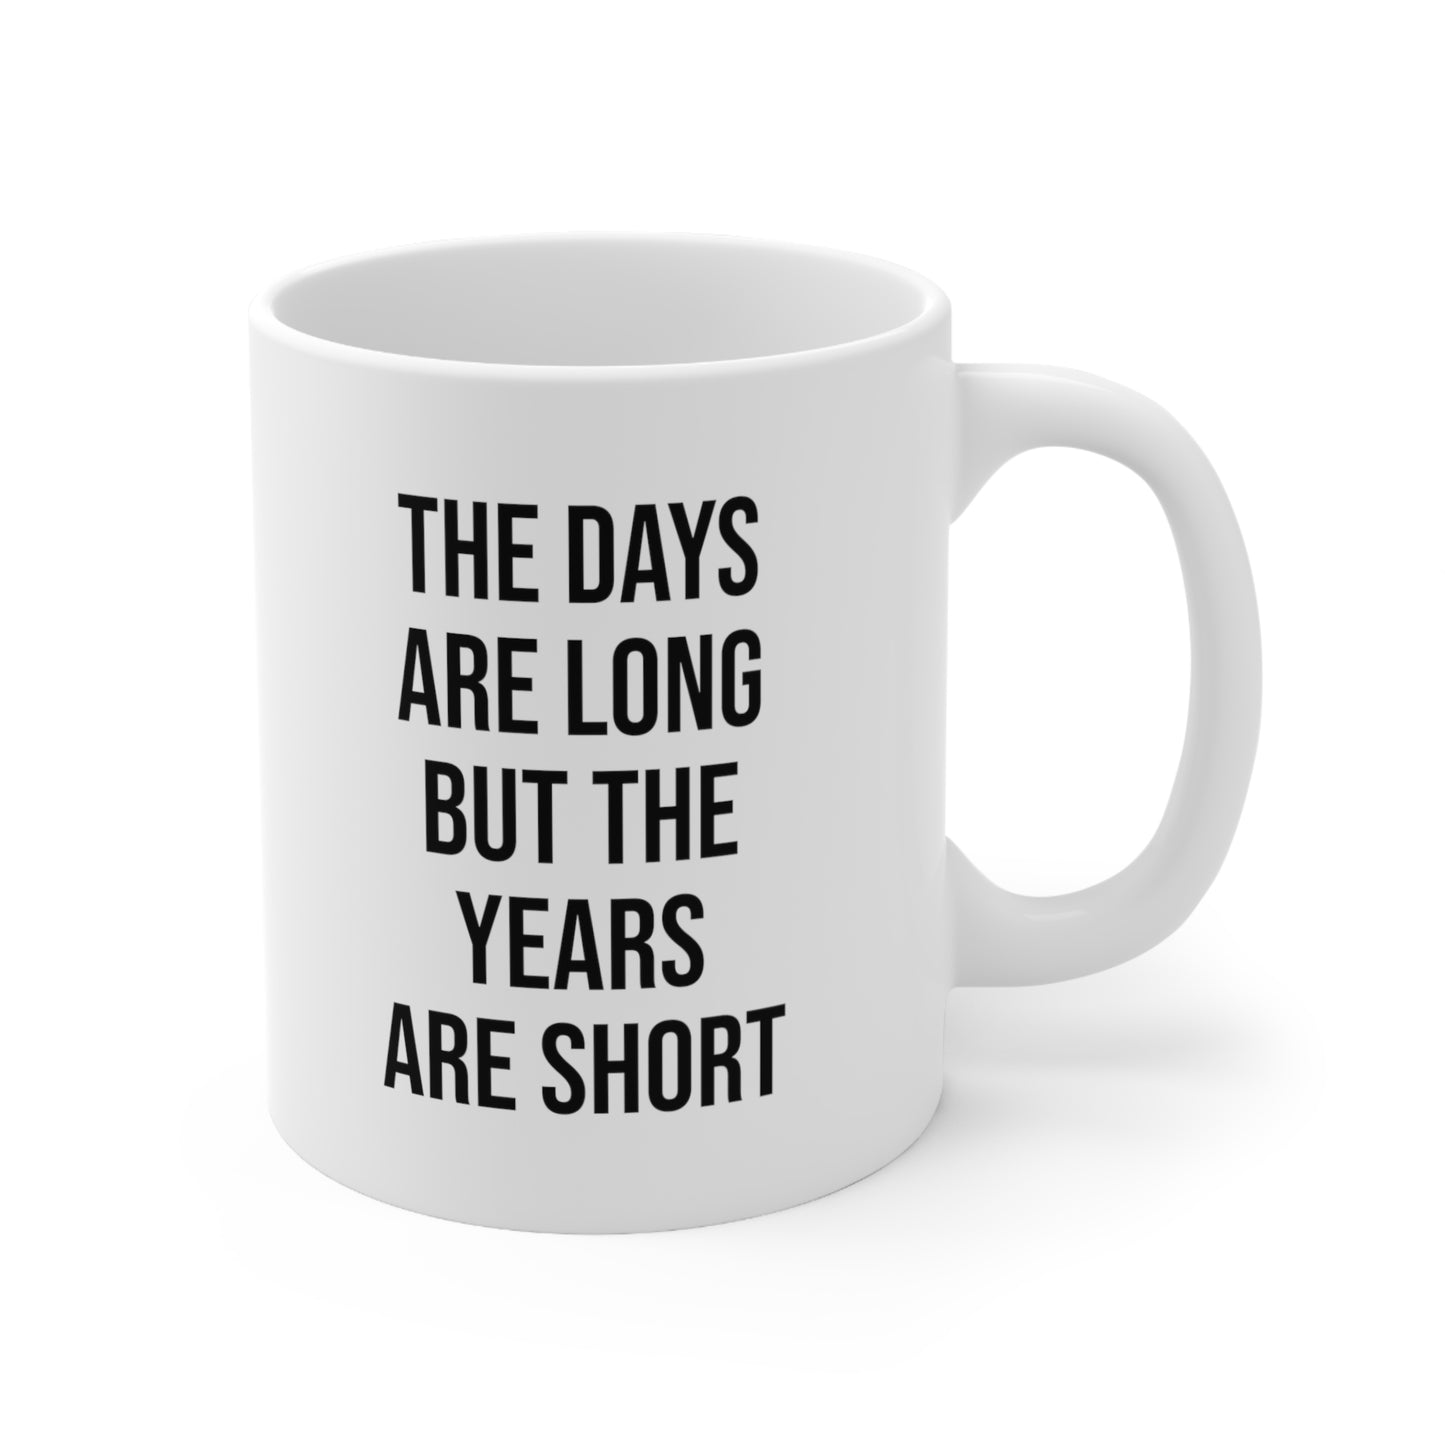 The Days Are Long But The Years Are Short Coffee Mug 11oz